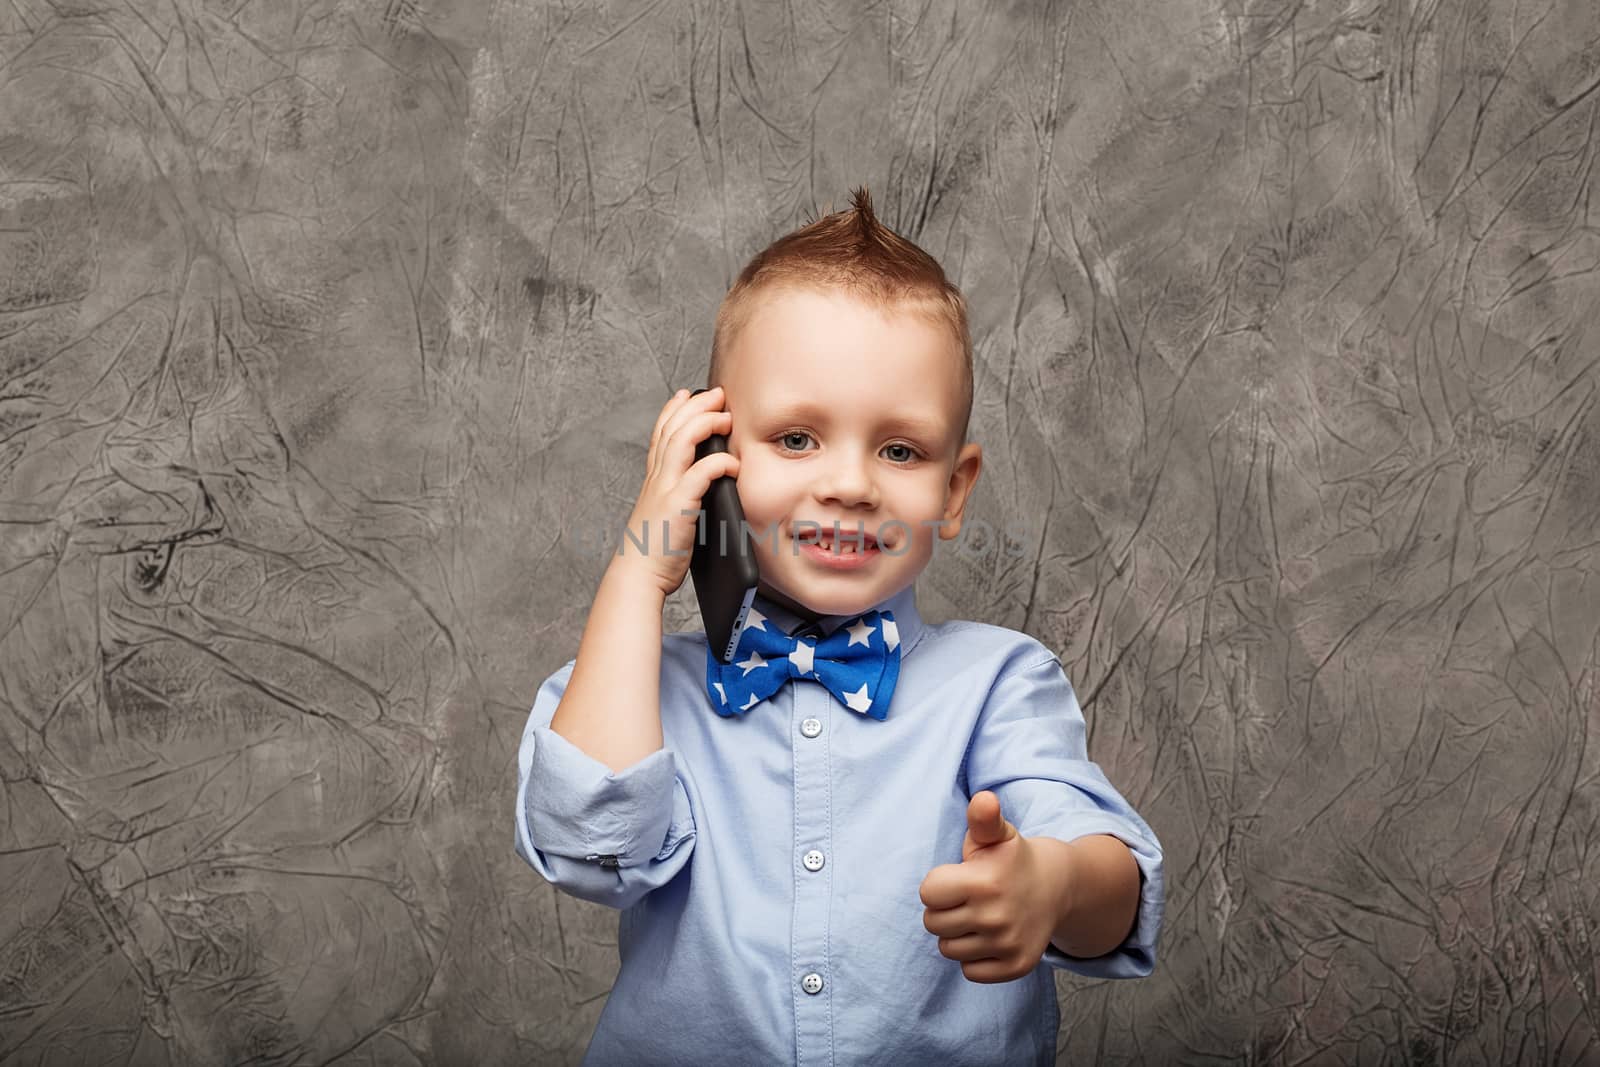 Portrait of a cute little boy in blue shirt and bow tie with mobile phone against gray textural background in studio. Kid shows thumb